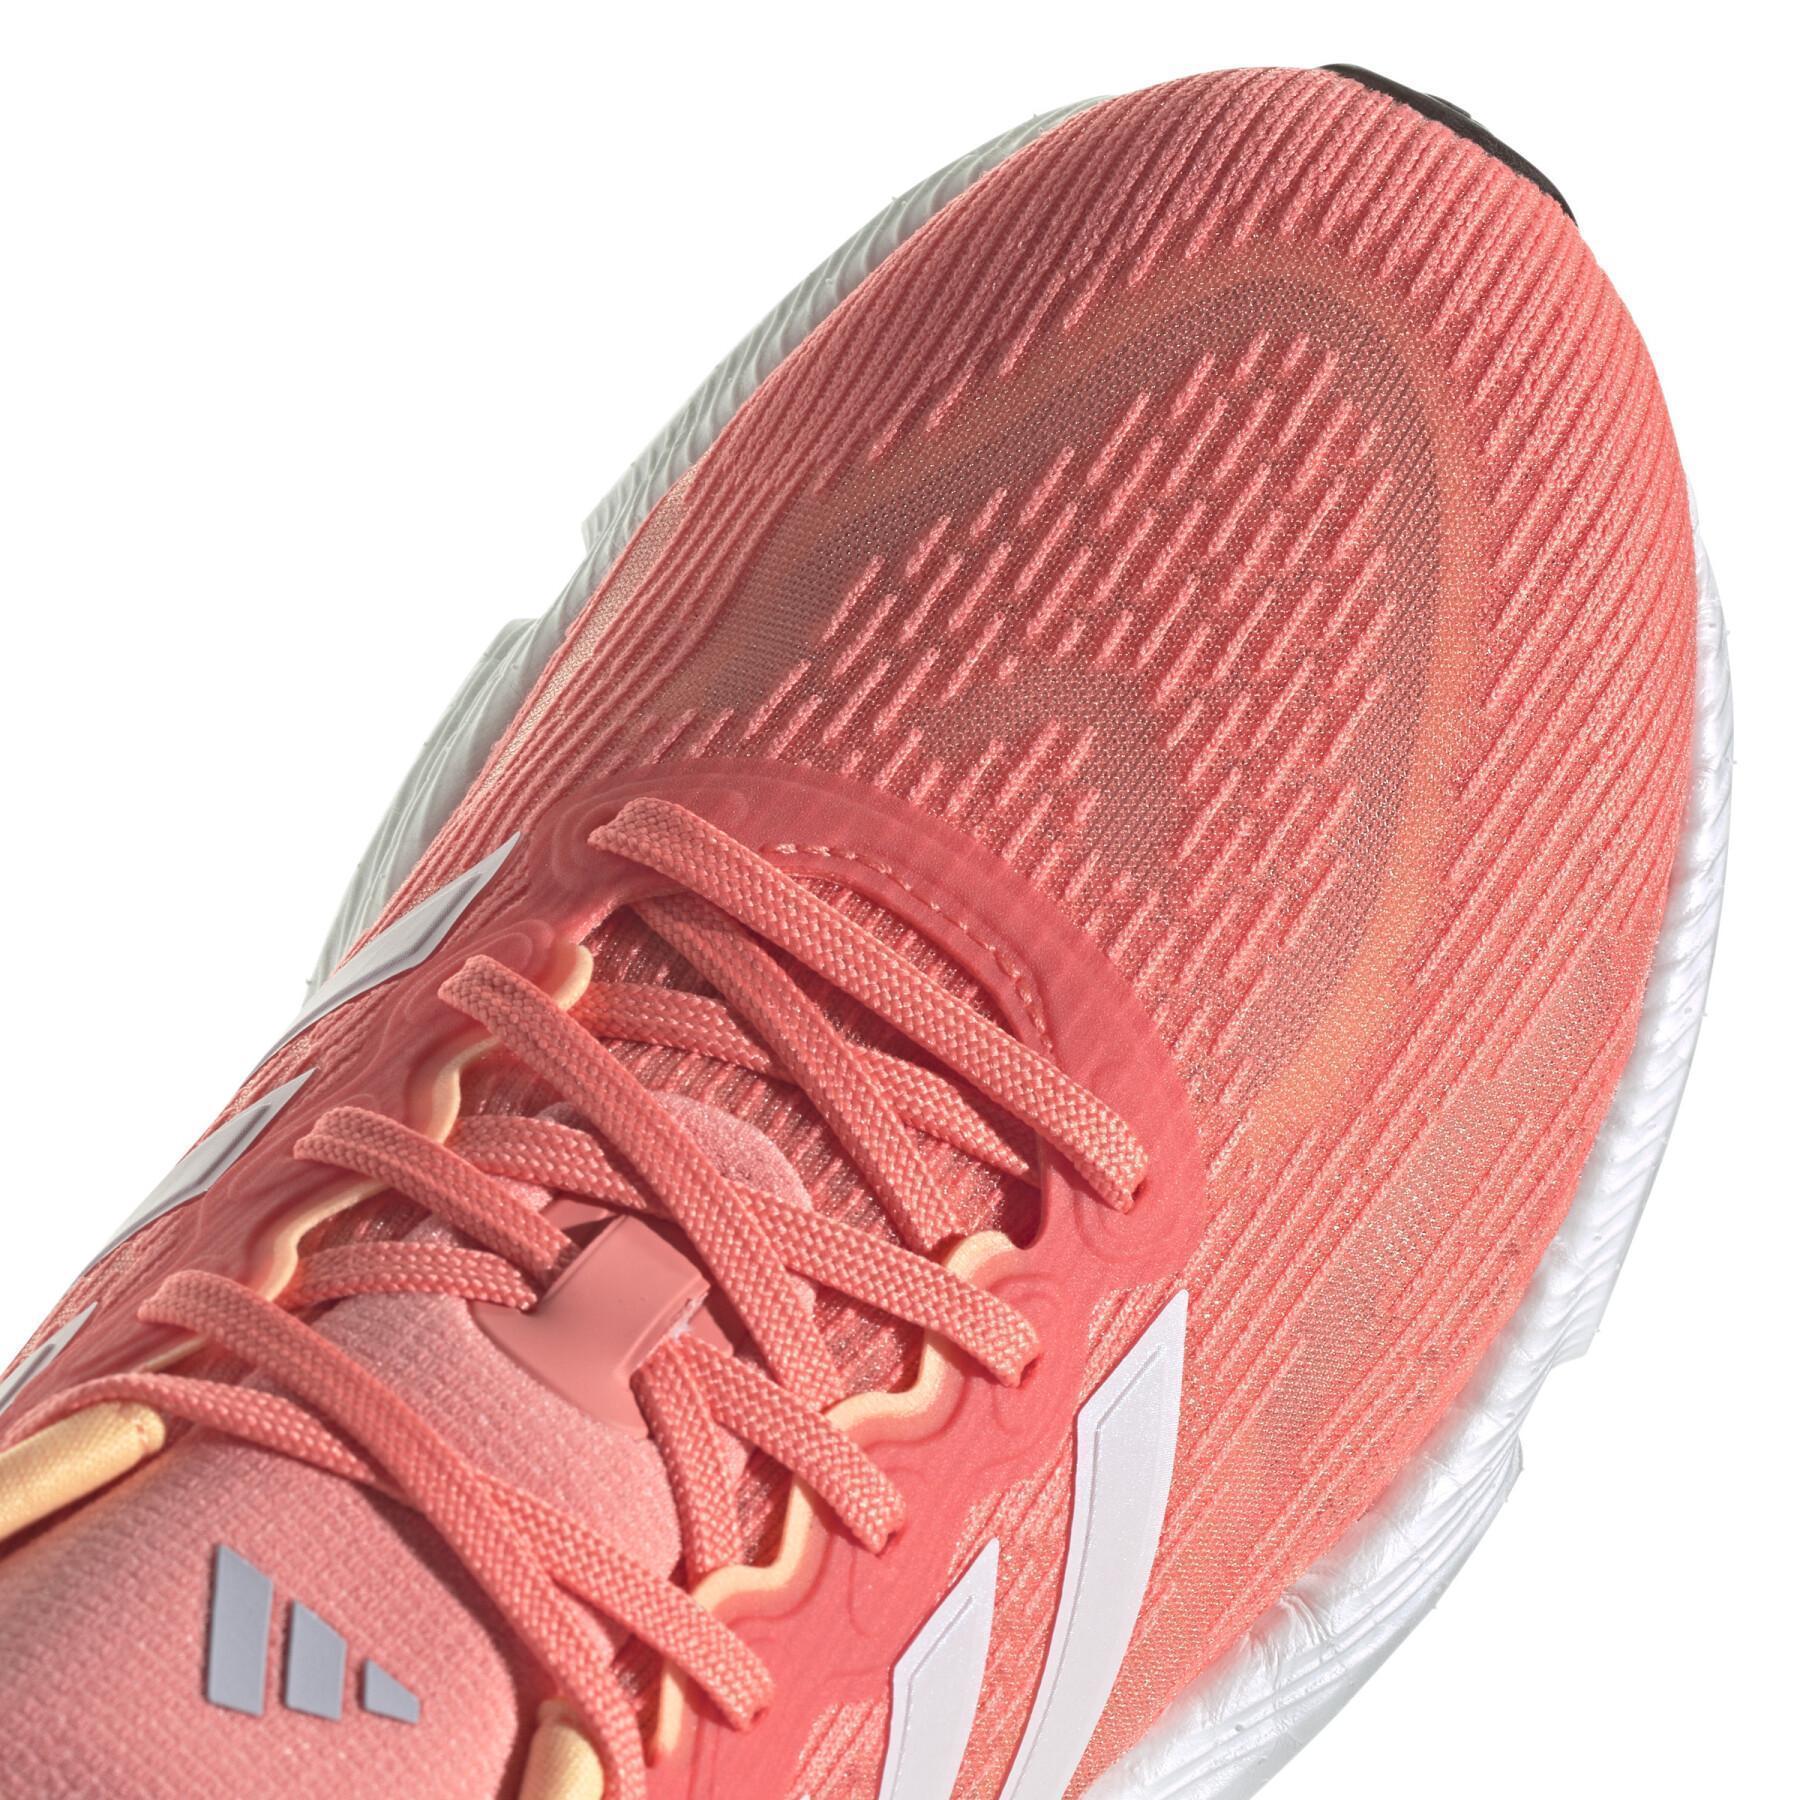 Women's running shoes adidas Solarboost 5